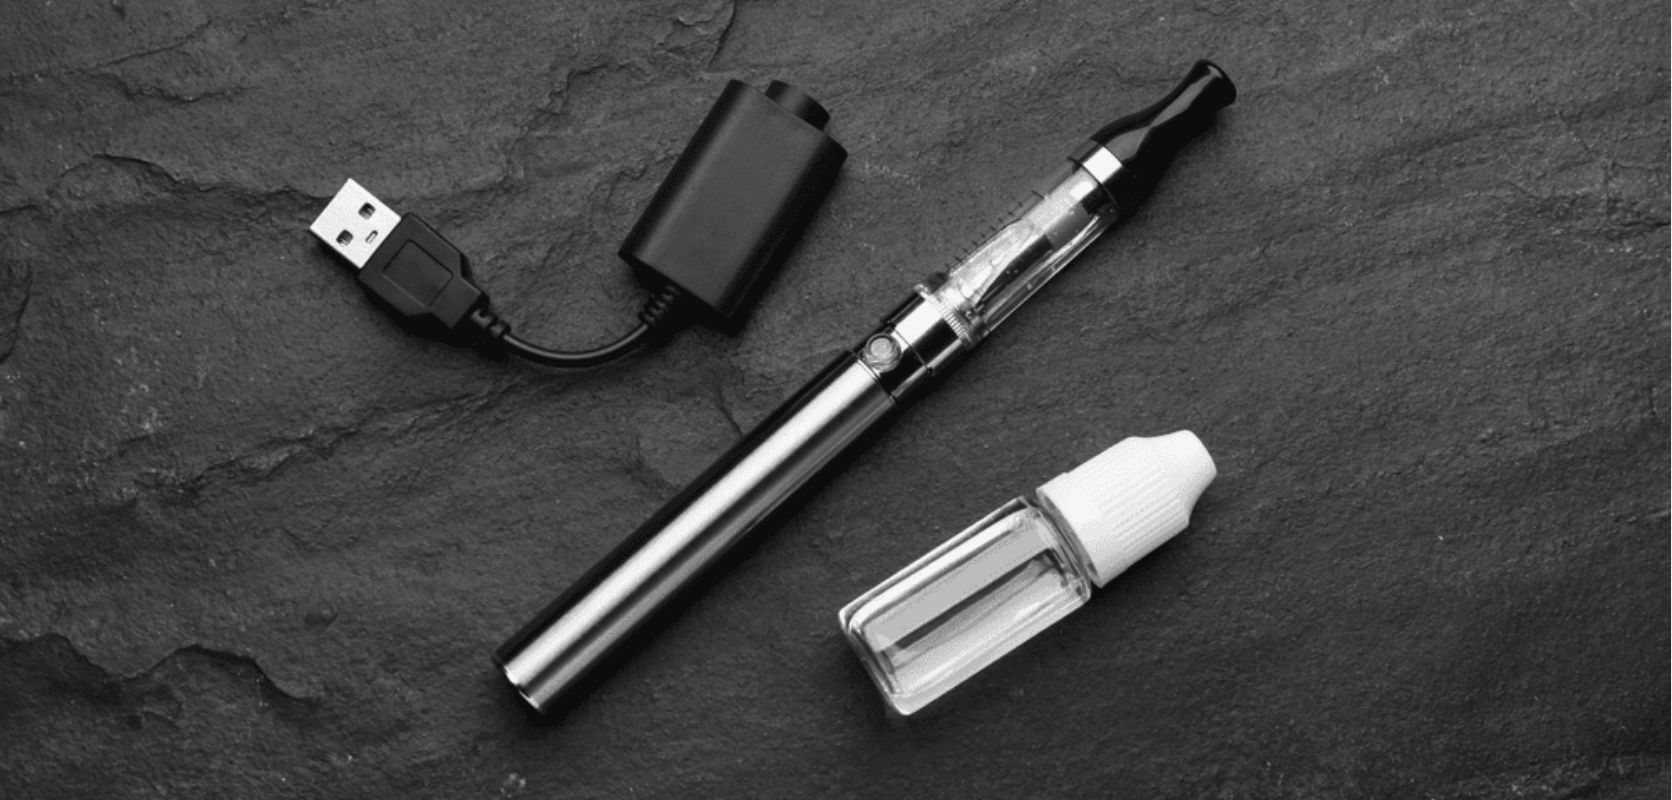 a 510 vape battery forms a stable and secure connection with your atomizer or cart, ensuring maximum device performance.